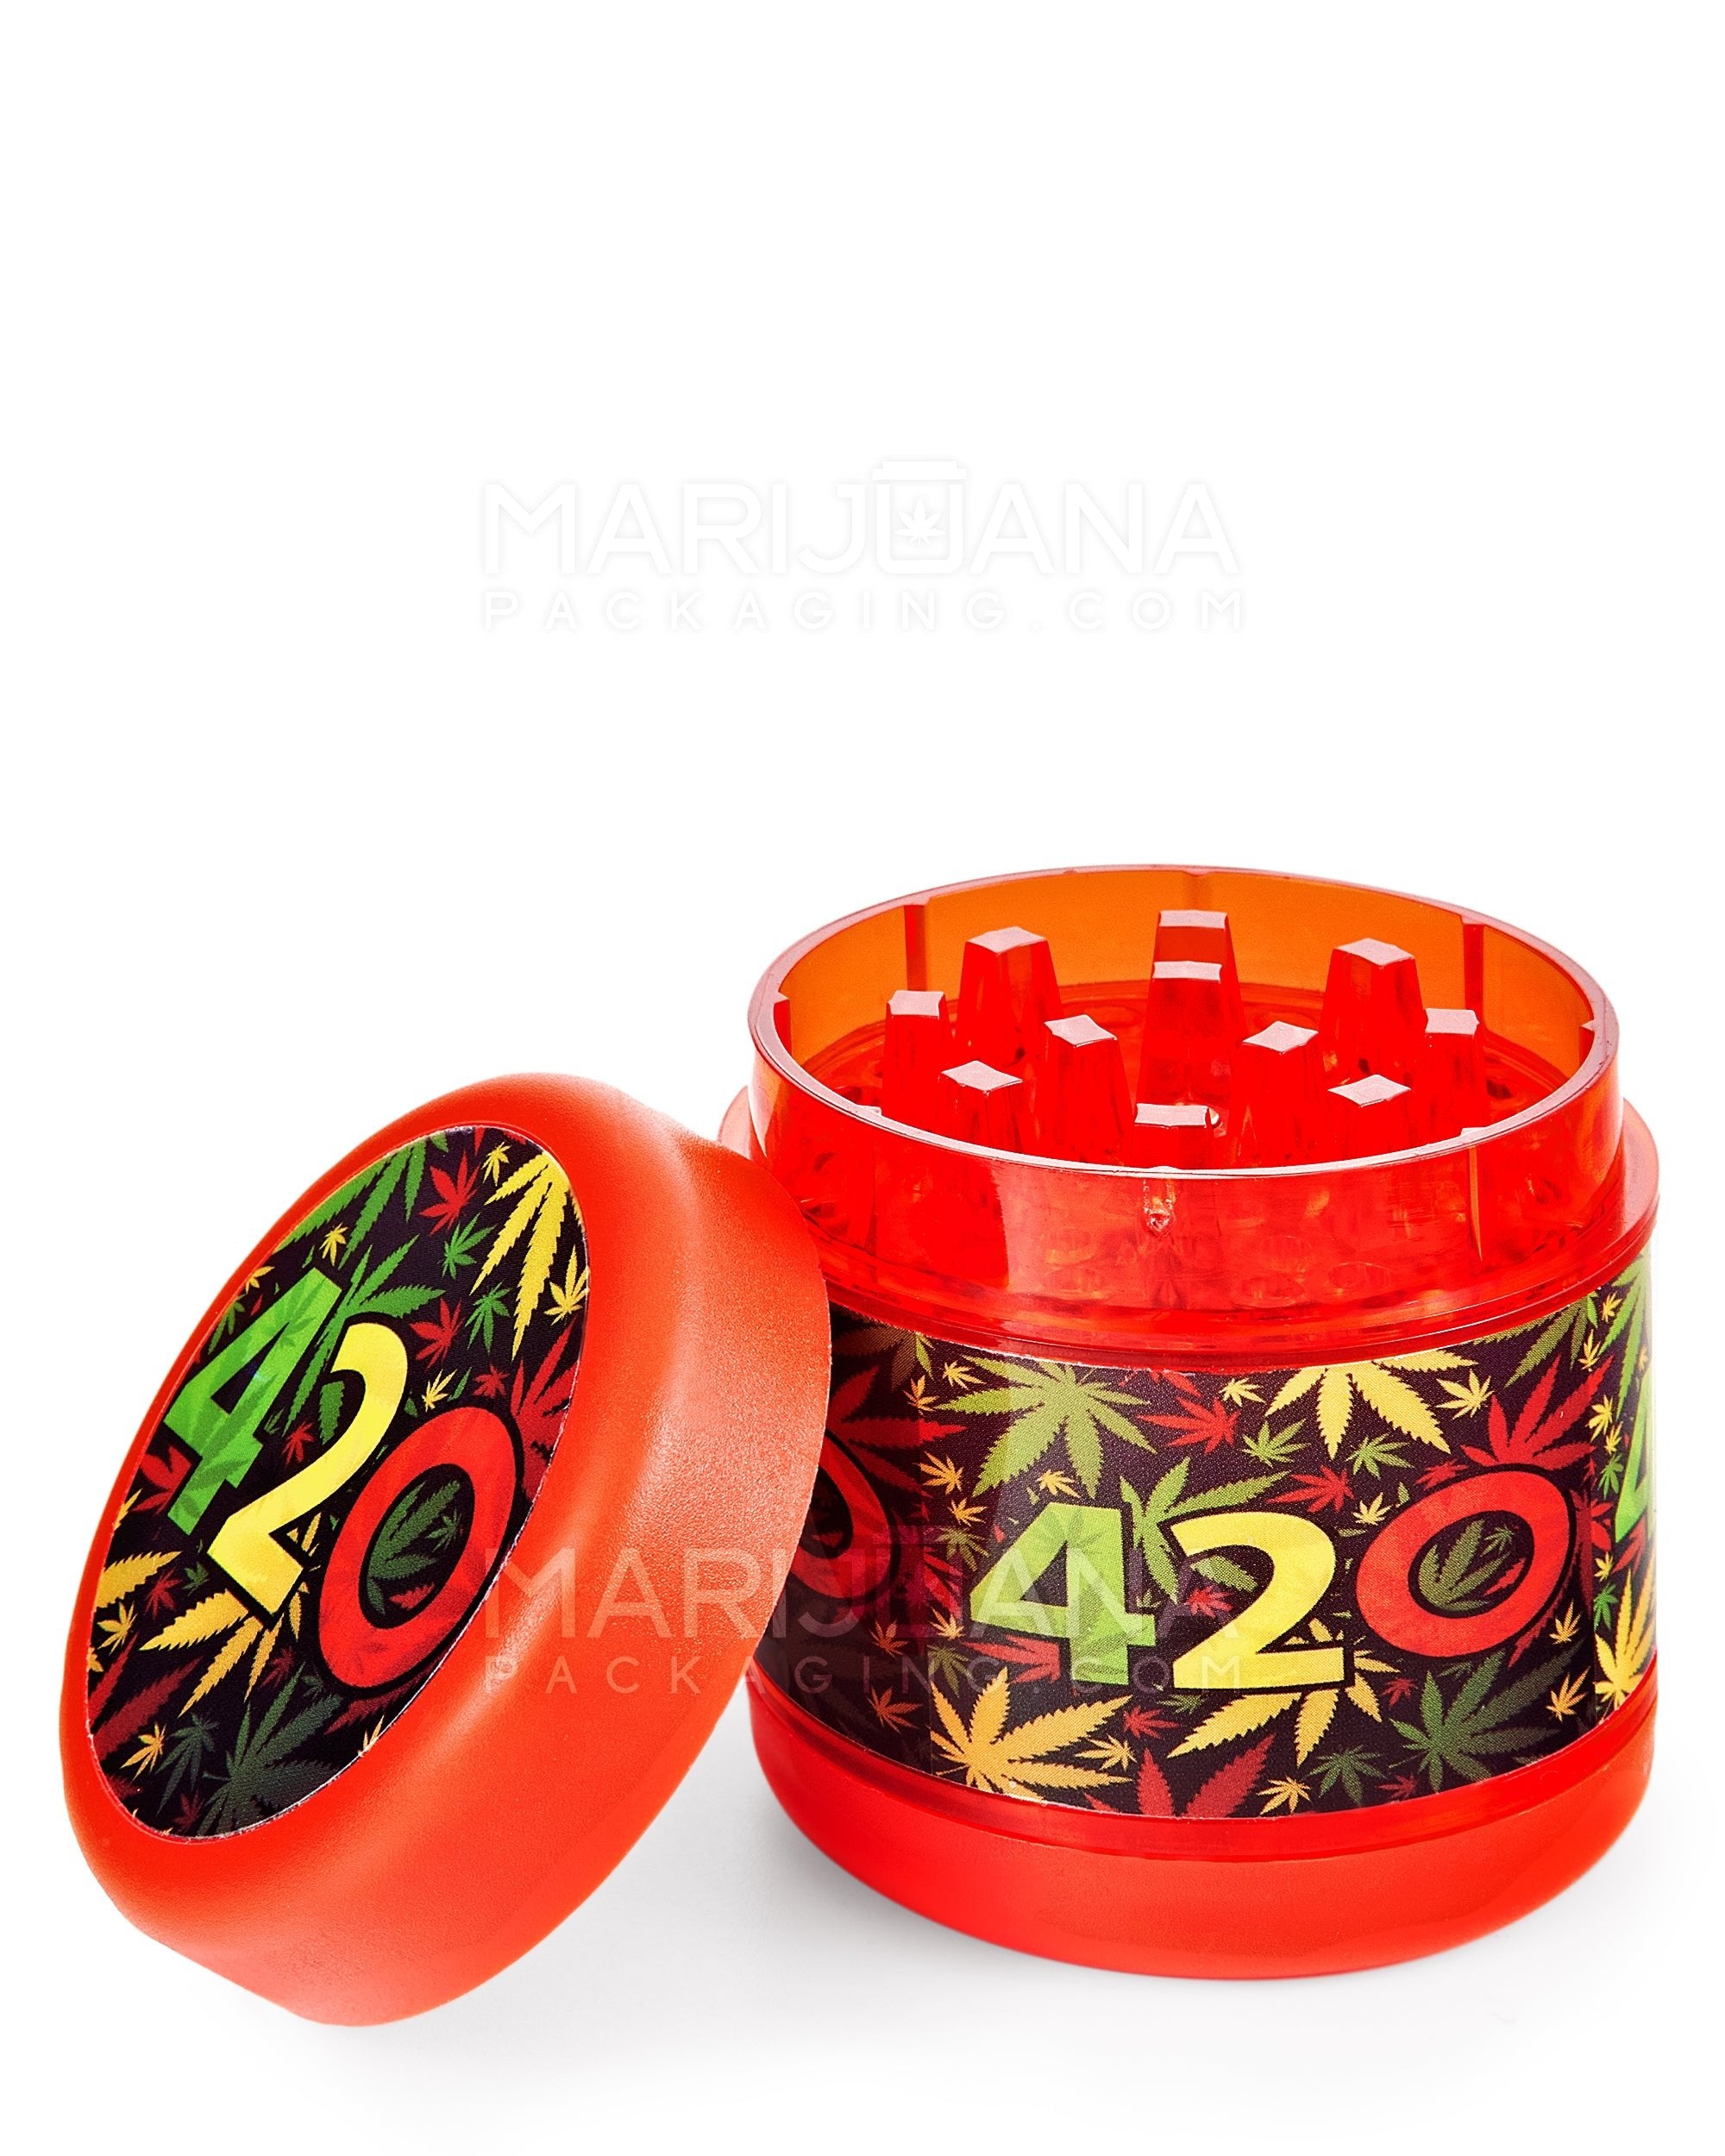 420 Decal Magnetic Plastic Grinder w/ Screen Catcher | 4 Piece - 54mm - Red - 1